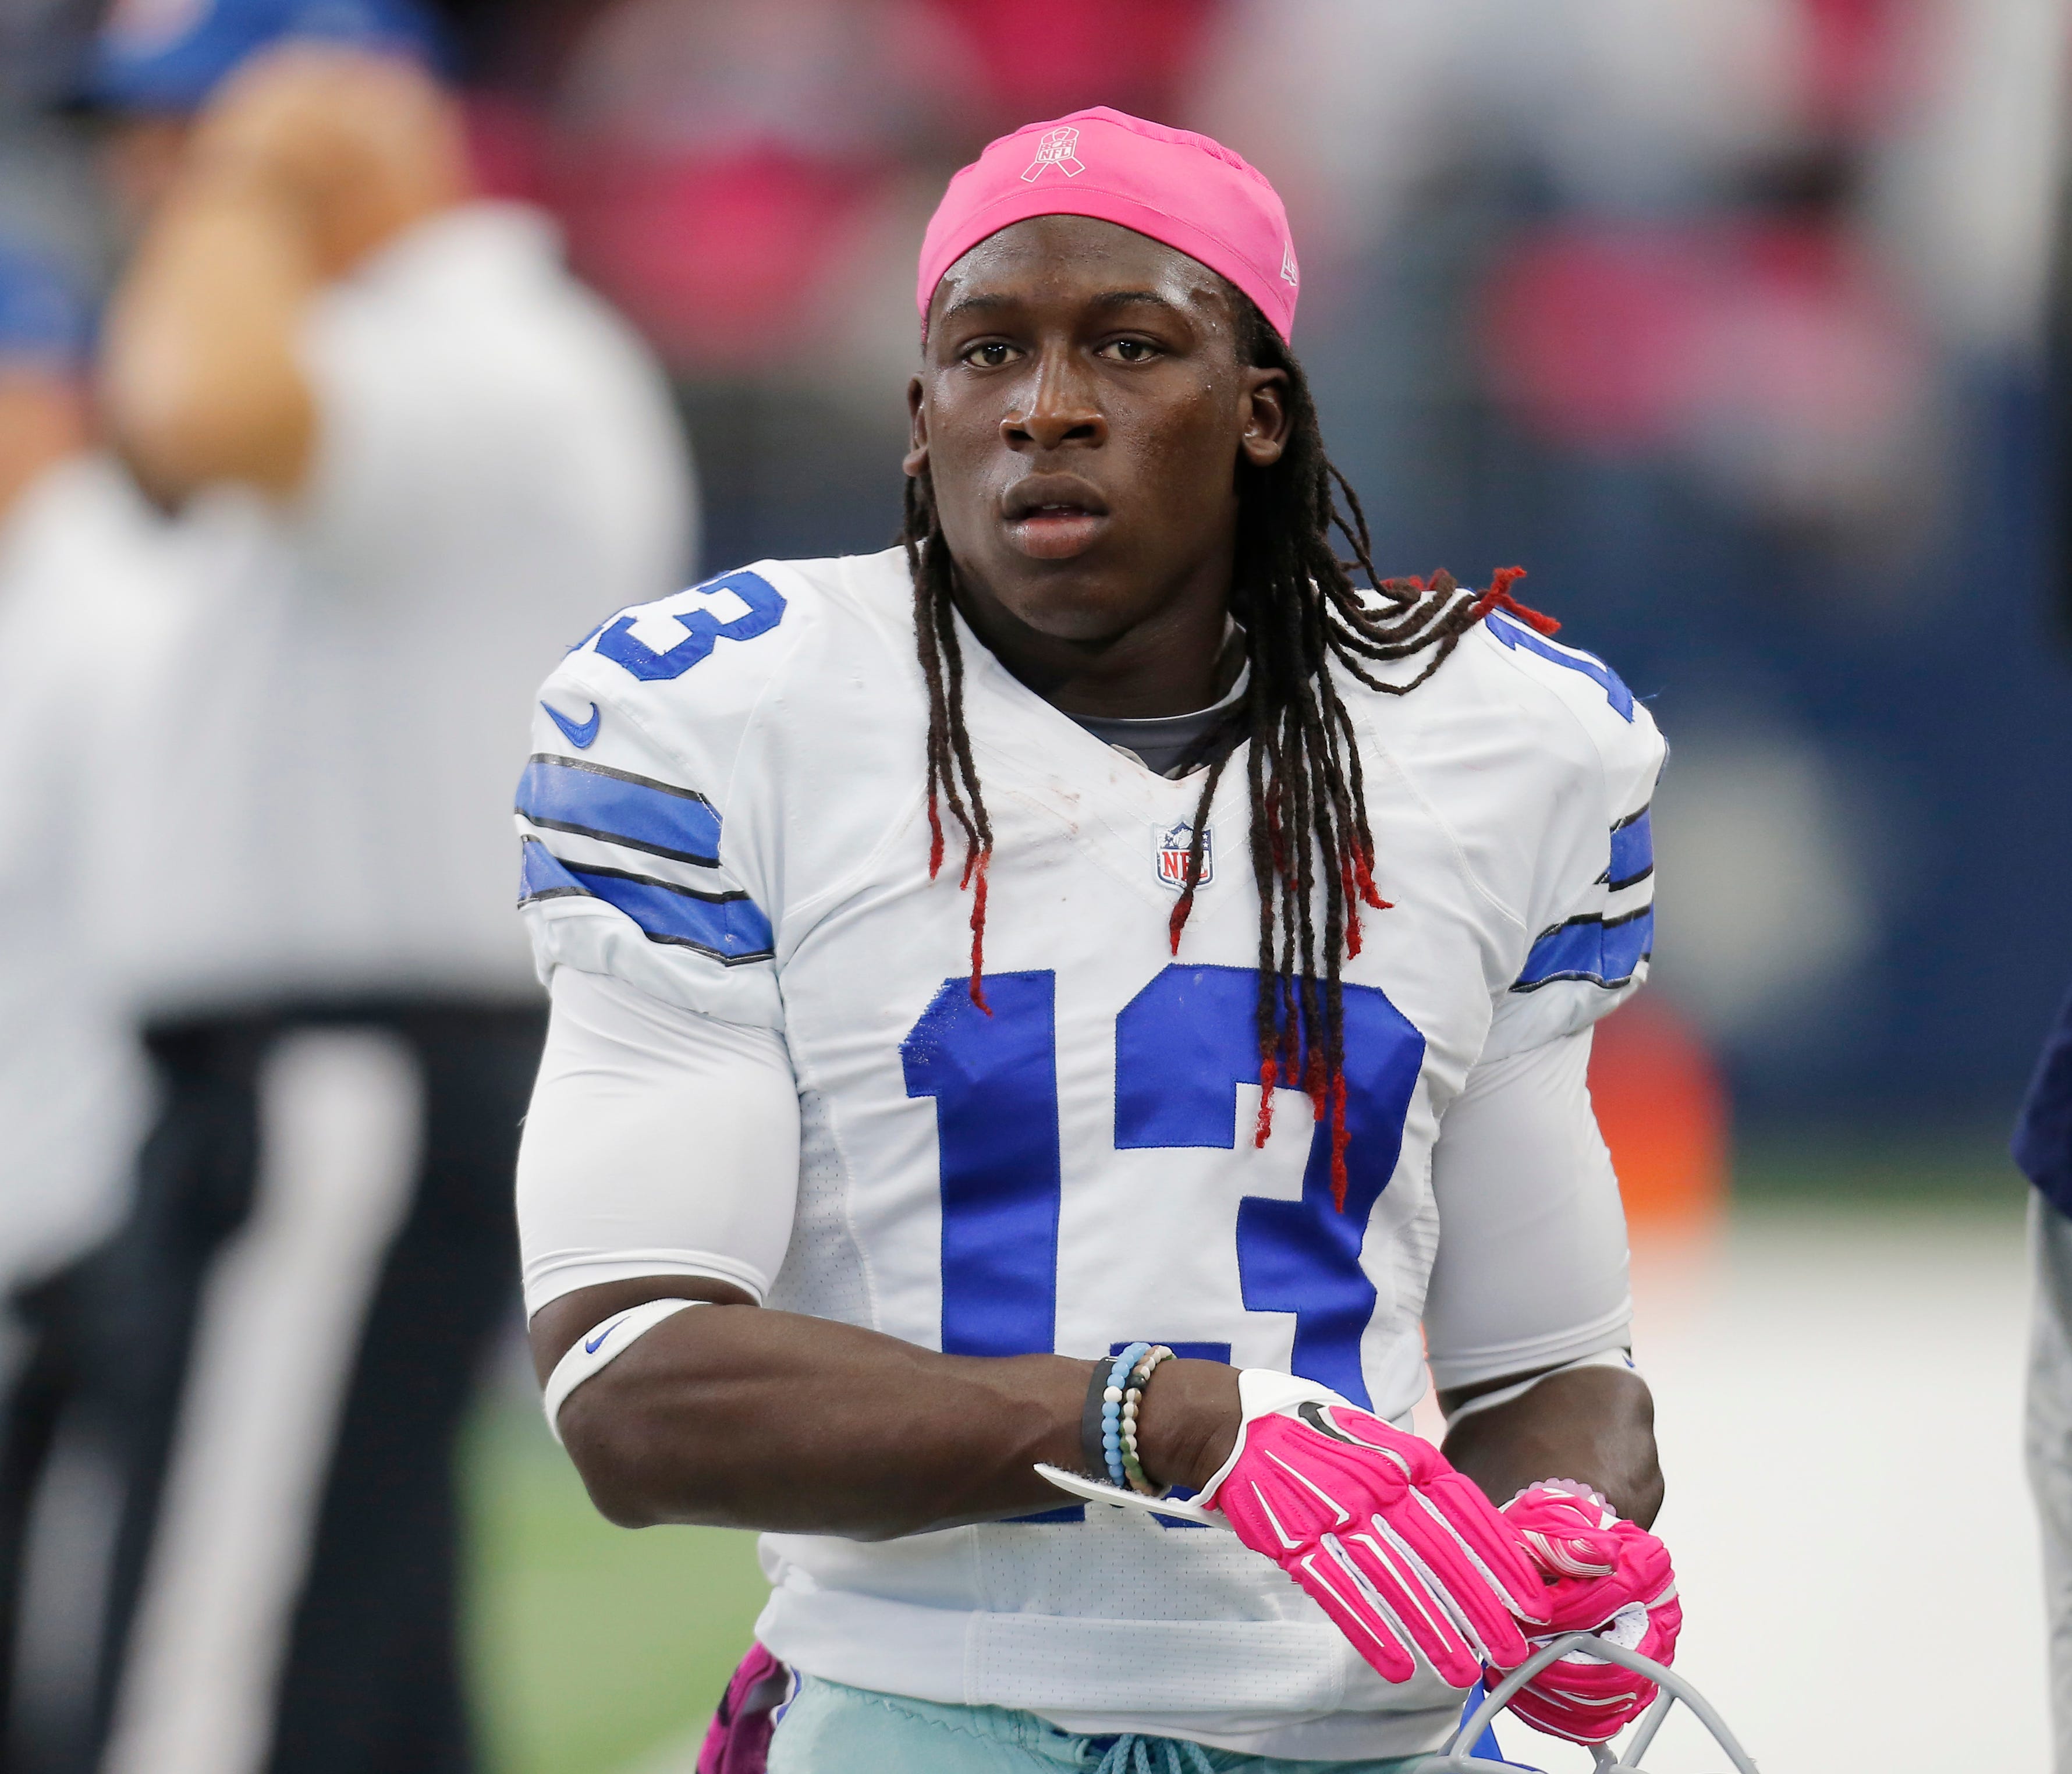 FILE - In this Oct. 11, 2015, file photo, Dallas Cowboys' Lucky Whitehead (13) prepares before an NFL football game against the New England Patriots in Arlington, Texas. Whitehead is asking for help locating his pitbull Blitz after burglars took the 